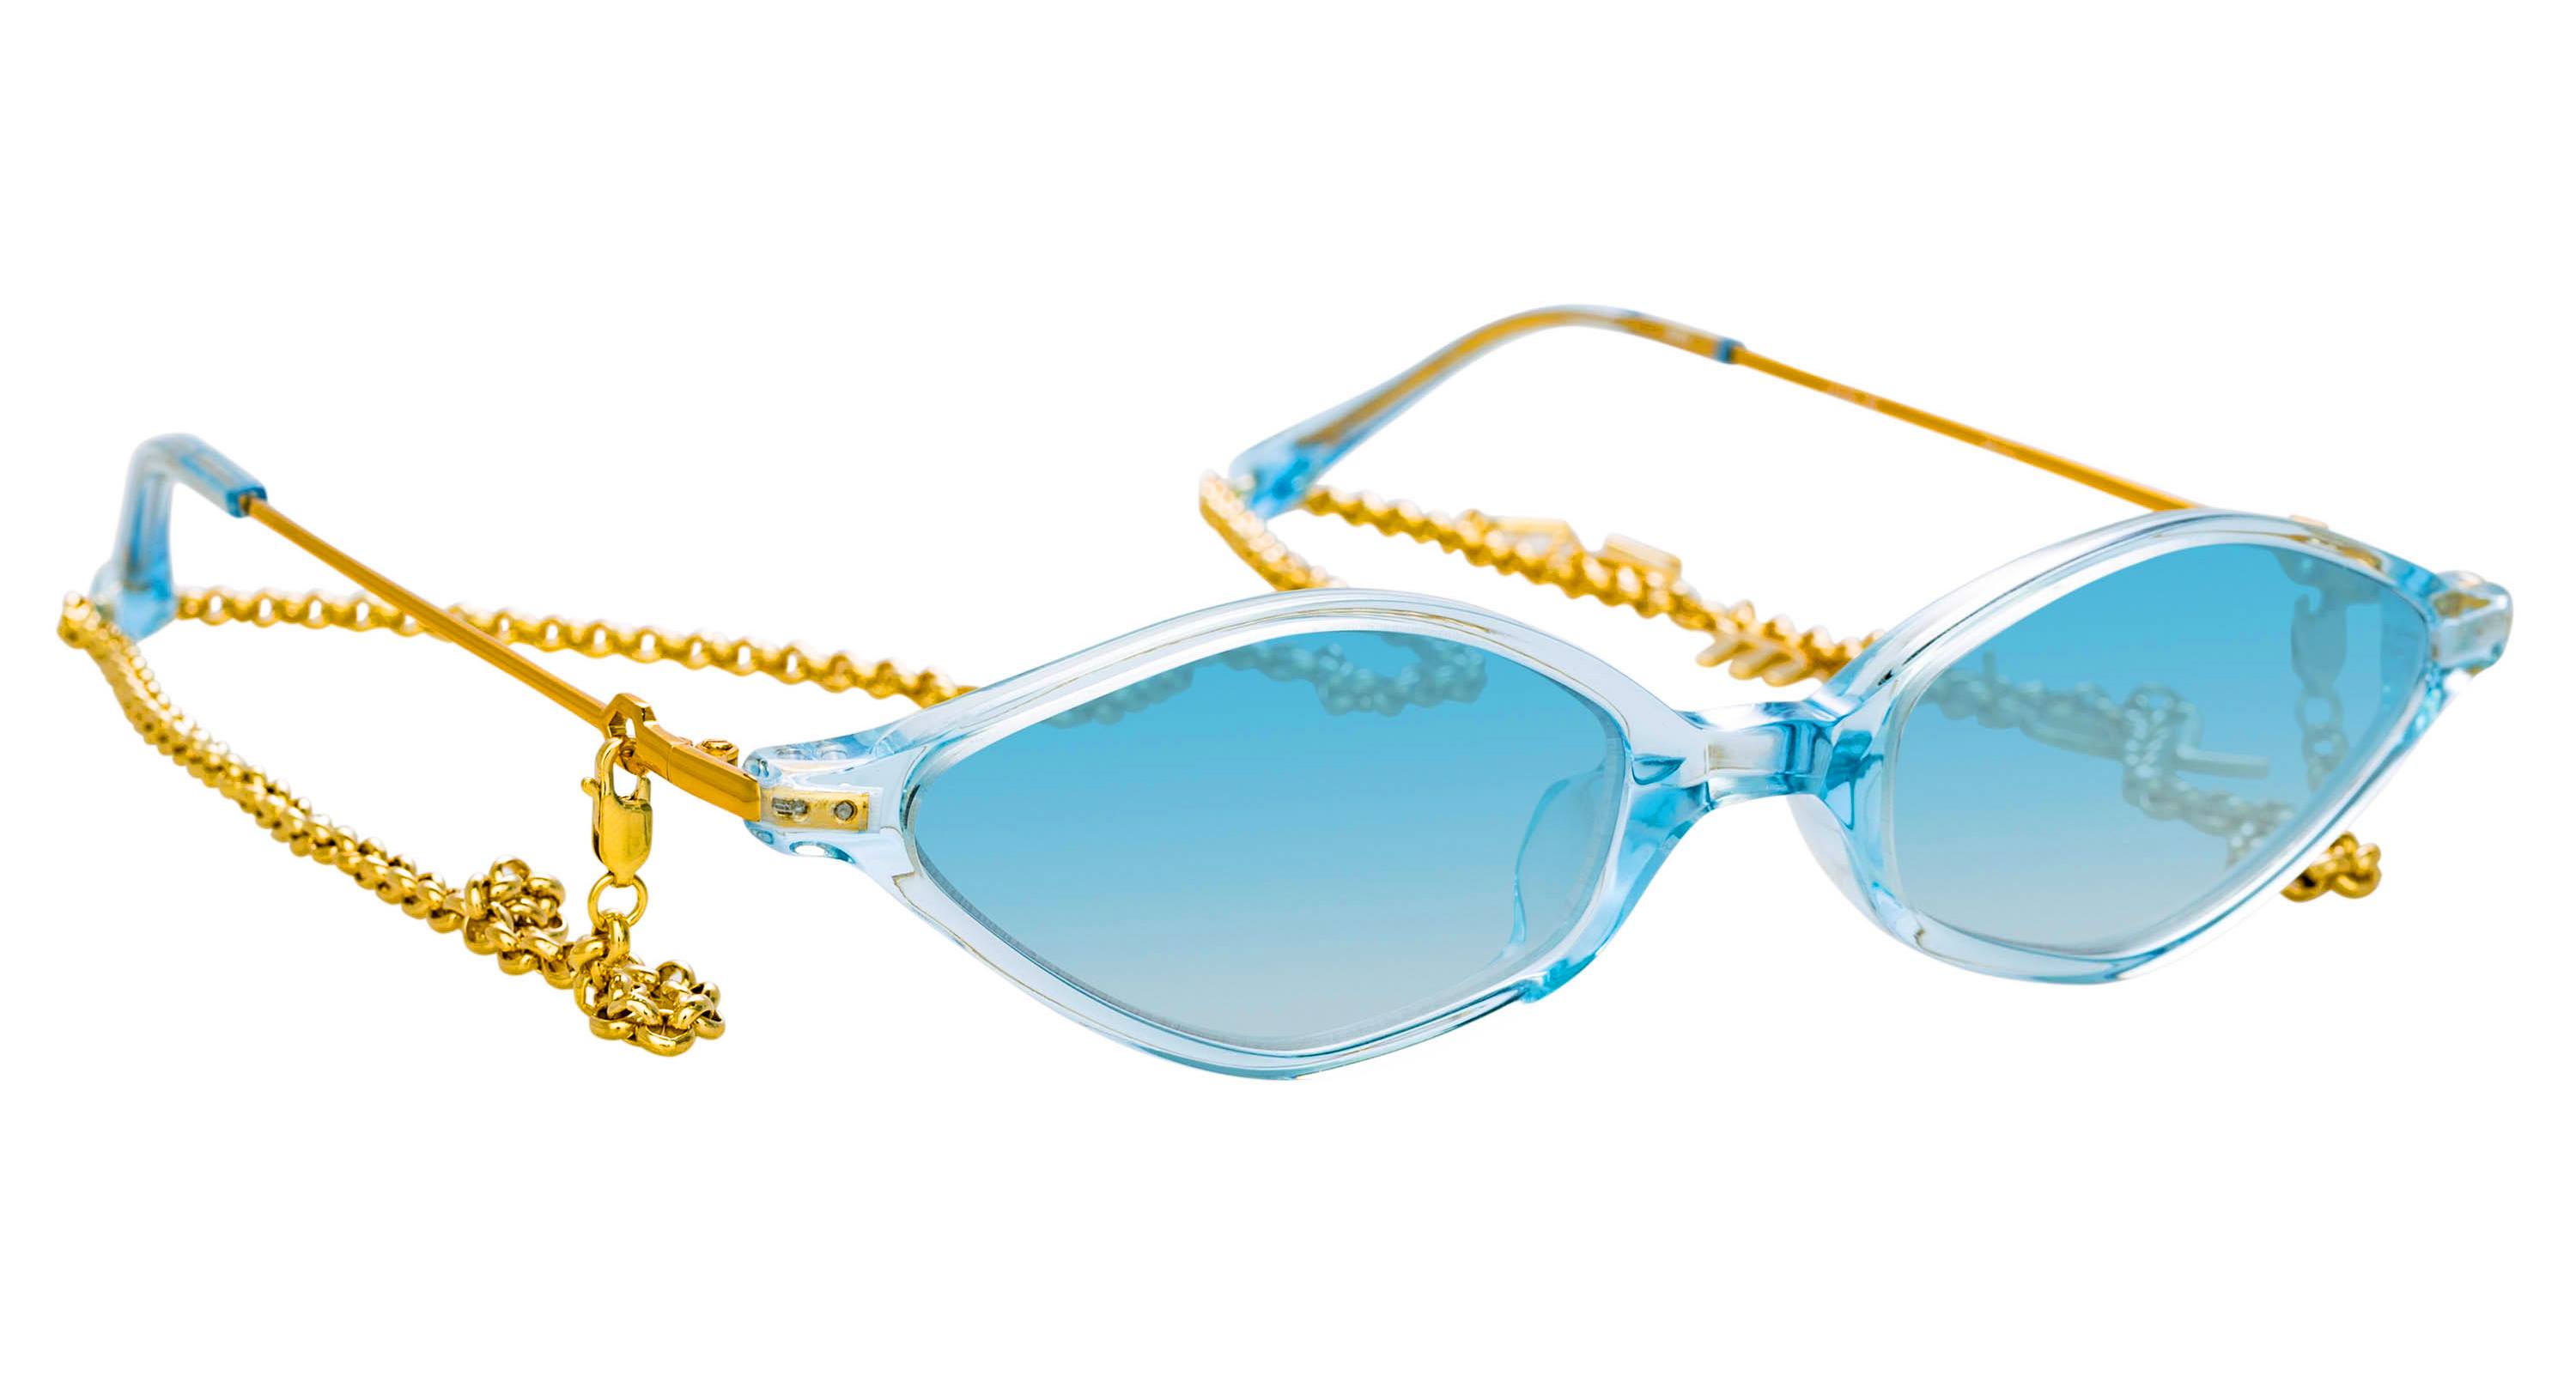 Blue Linda Farrow Angular Cat-Eye sunglasses with a detachable 18k gold-plated brass chain in collaboration with Alessandra Rich